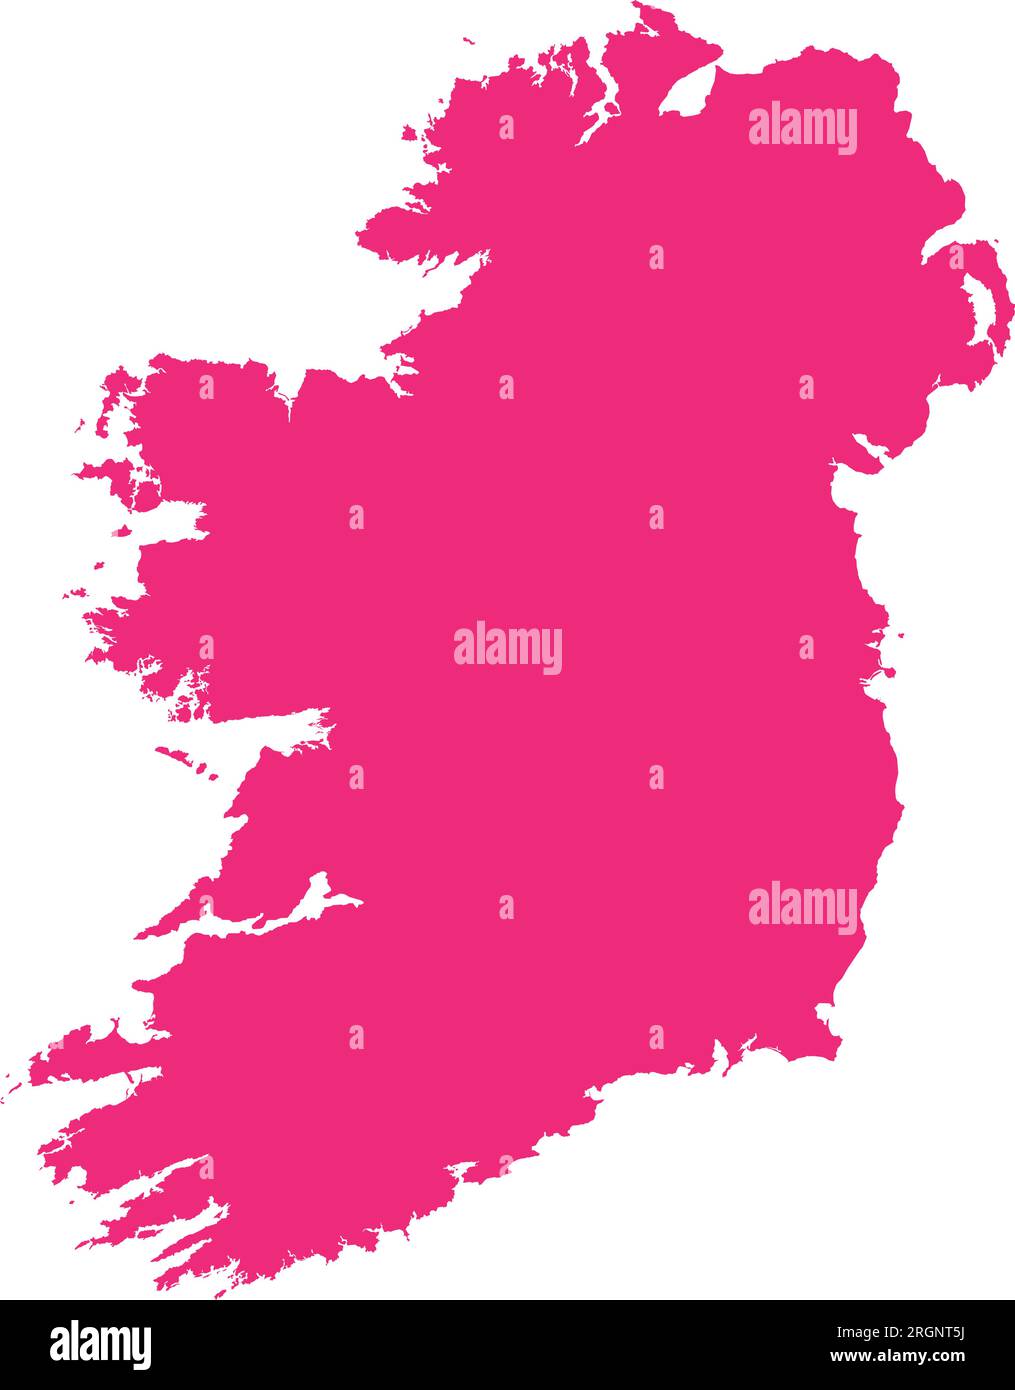 ROSE CMYK color map of IRELAND Stock Vector